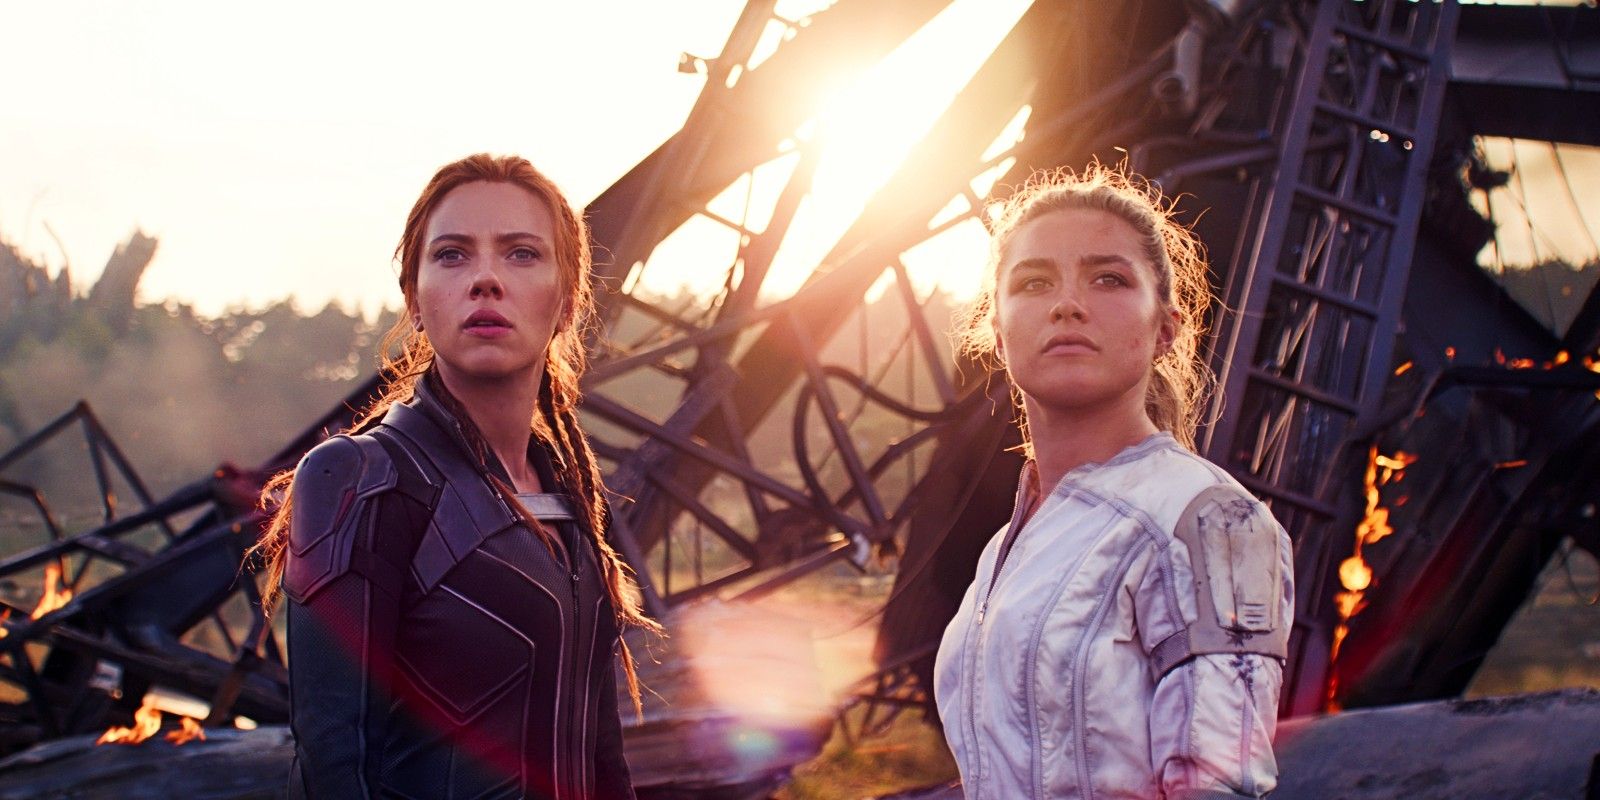 Scarlett Johansson as Natasha and Florence Pugh as Yelena standing together in Black Widow 